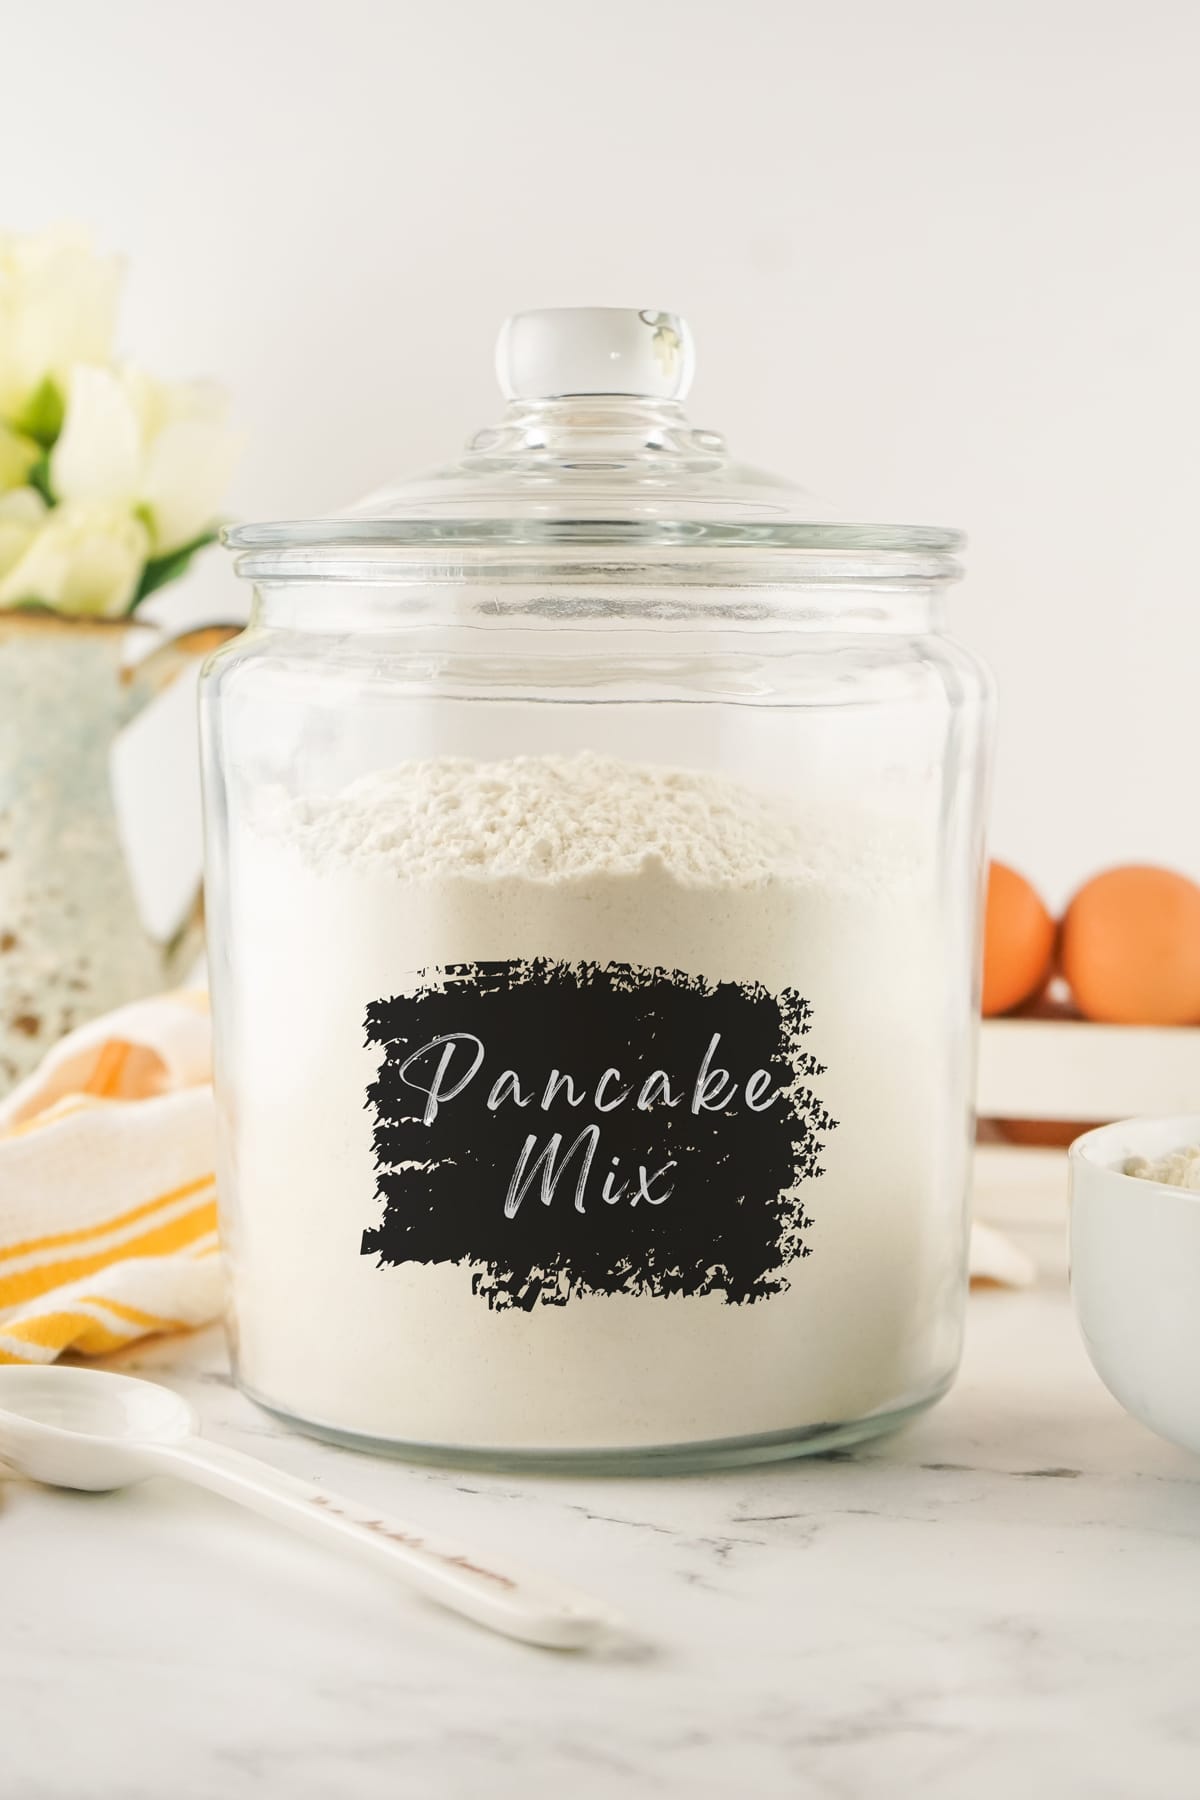 A glass jar of Homemade Pancake Mix with label